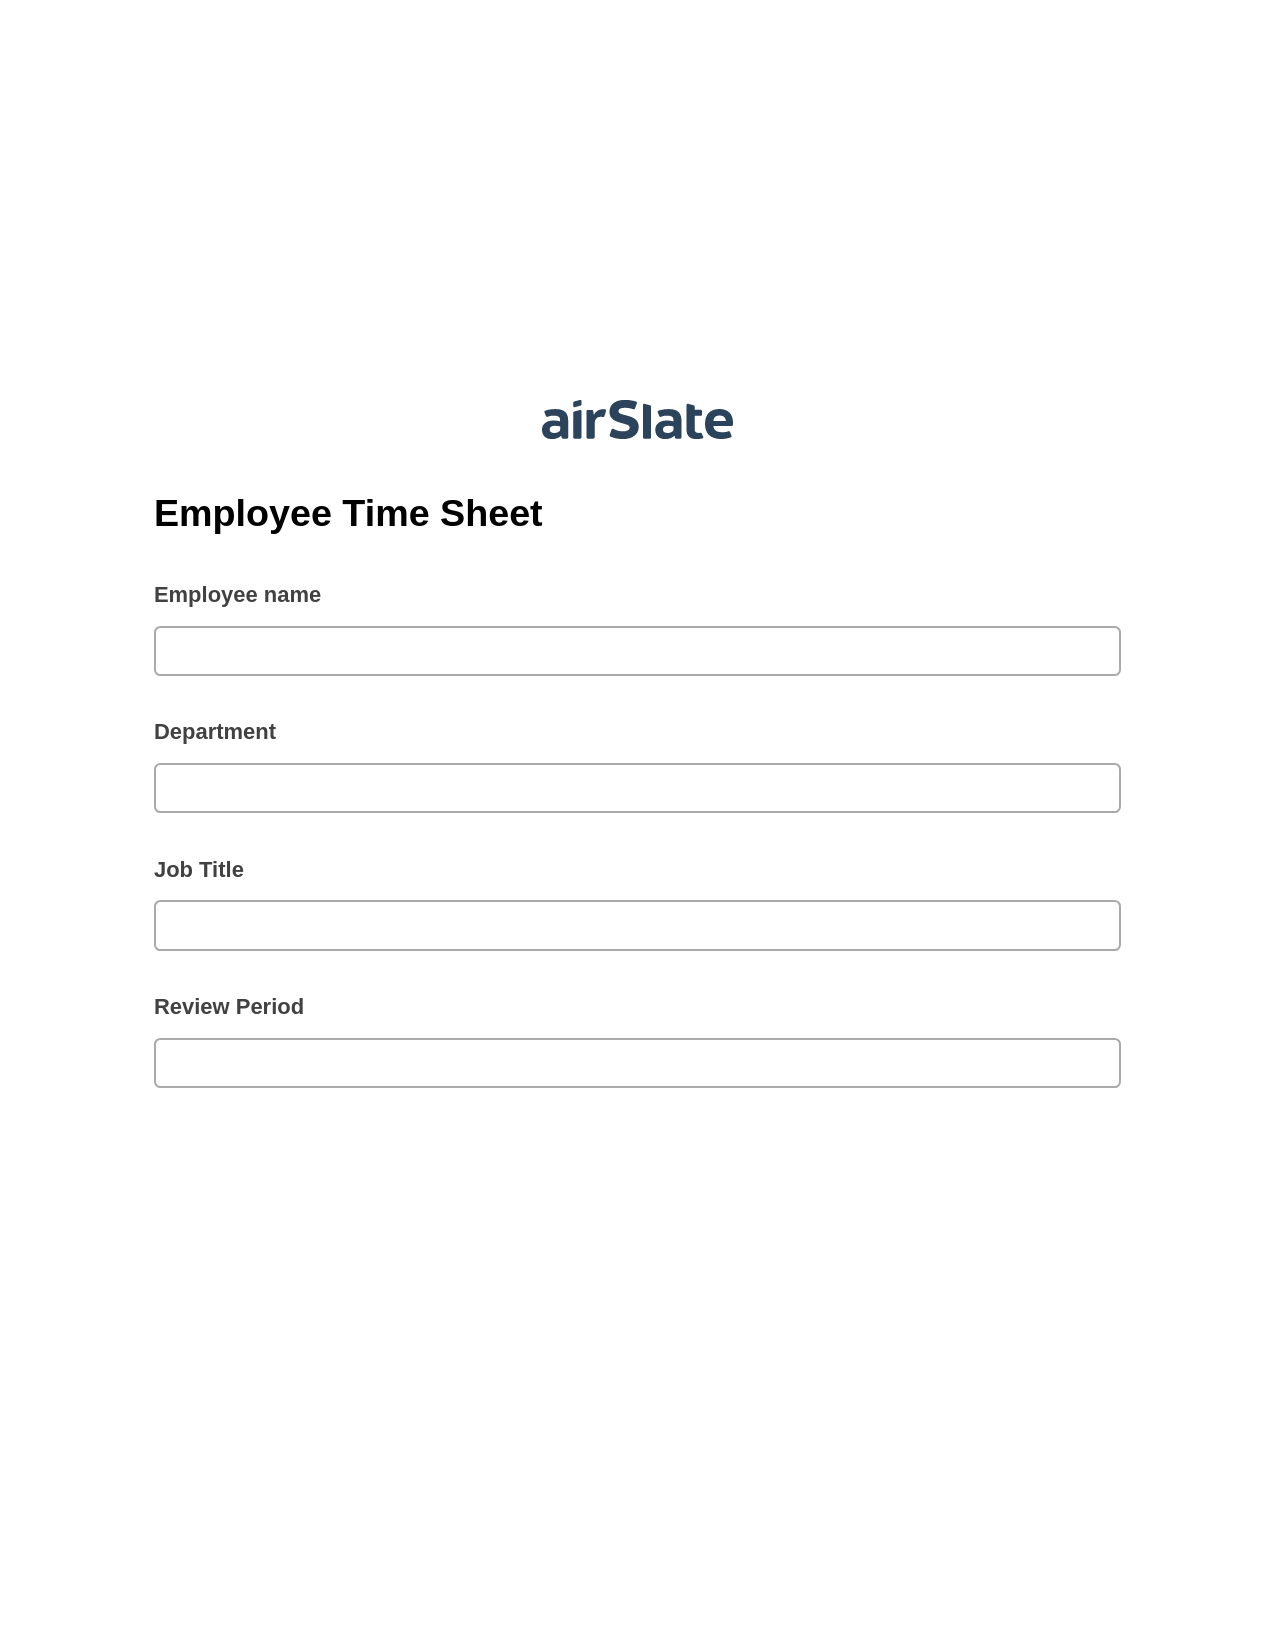 Multirole Employee Time Sheet Pre-fill from Google Sheets Bot, Create Salesforce Records Bot, Export to Salesforce Record Bot